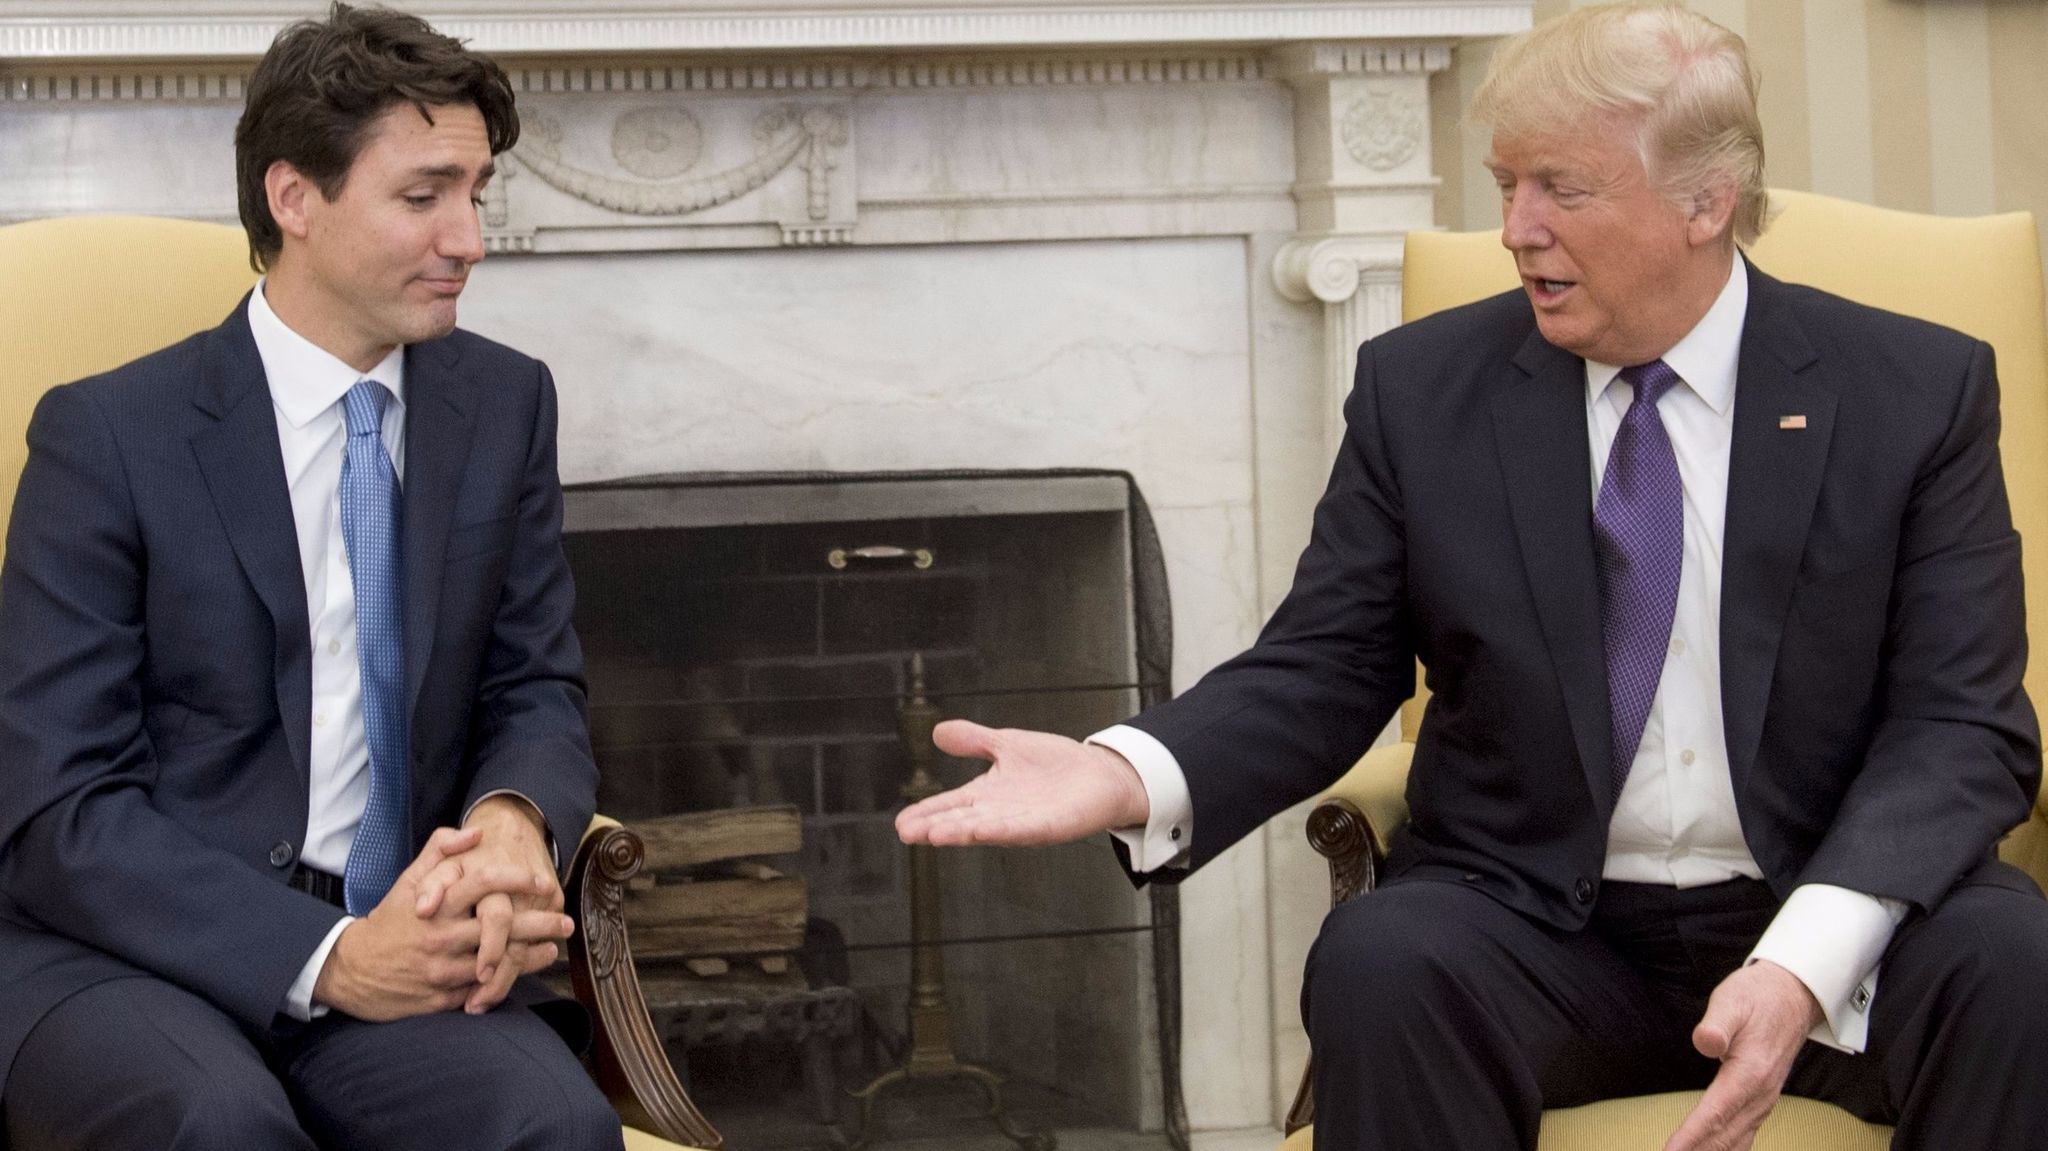 President Trump and Canadian Prime Minister Justin Trudeau